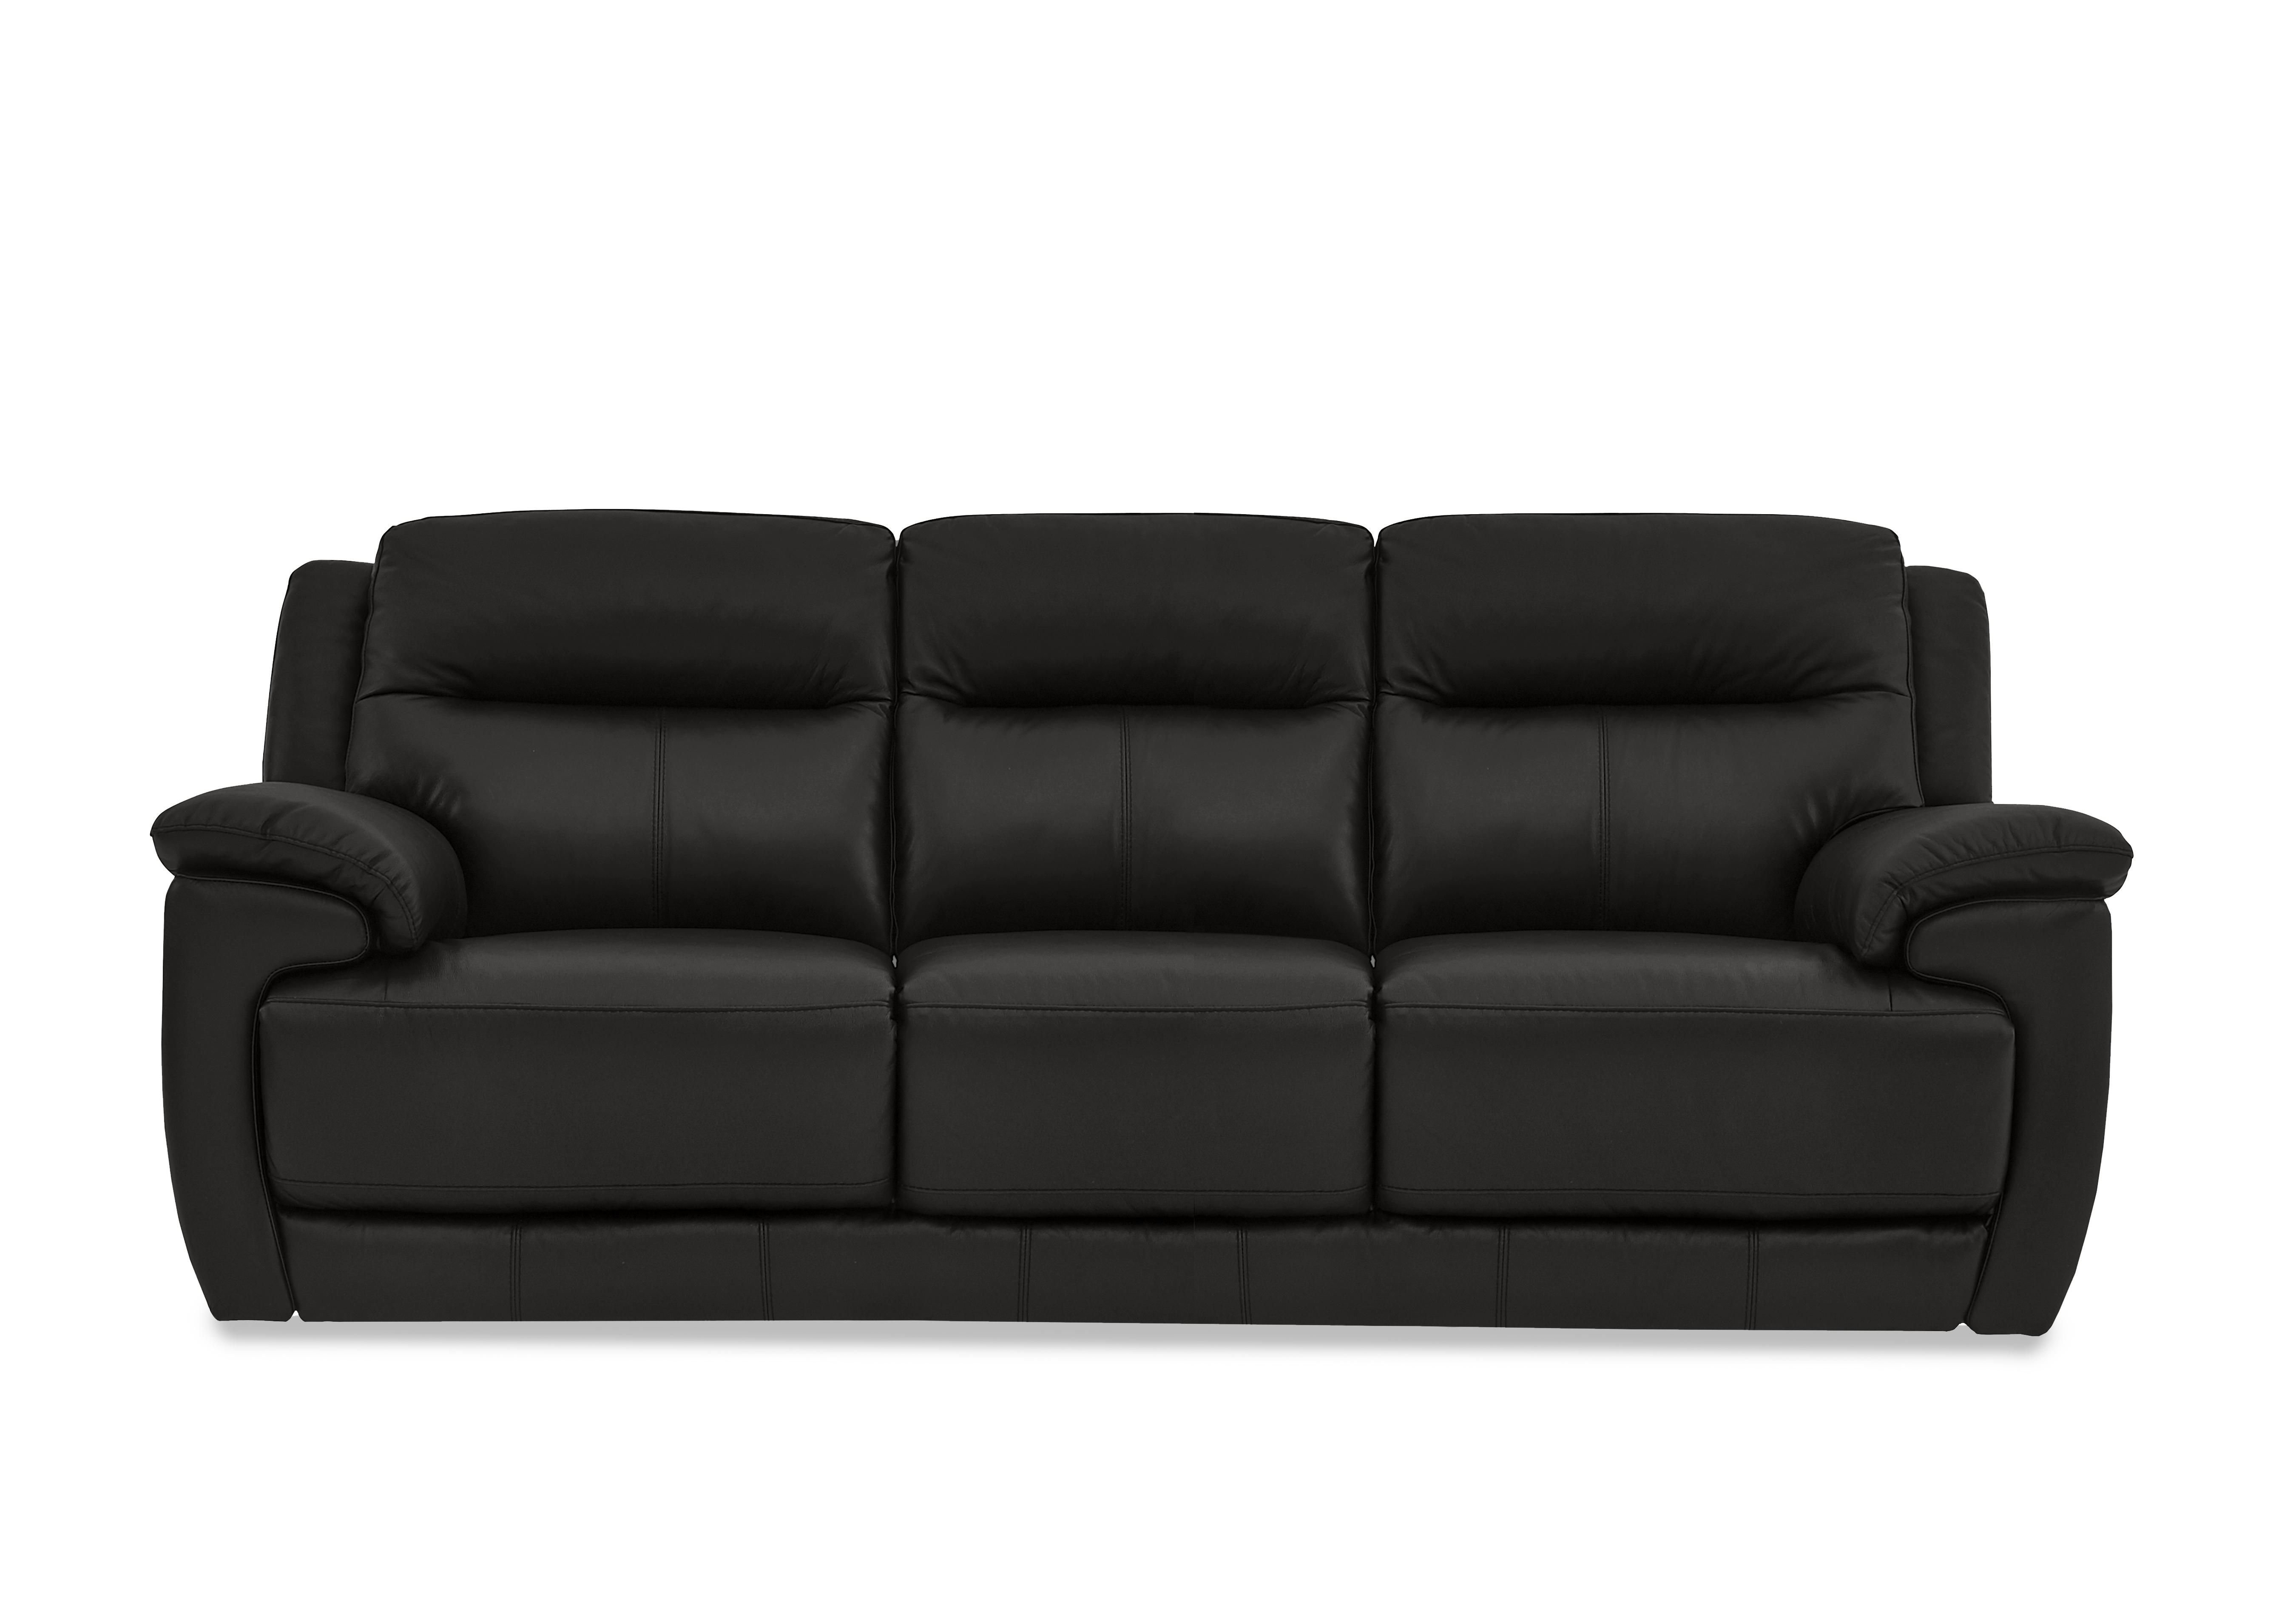 Touch 3 Seater Leather Sofa in Bv-3500 Classic Black on Furniture Village